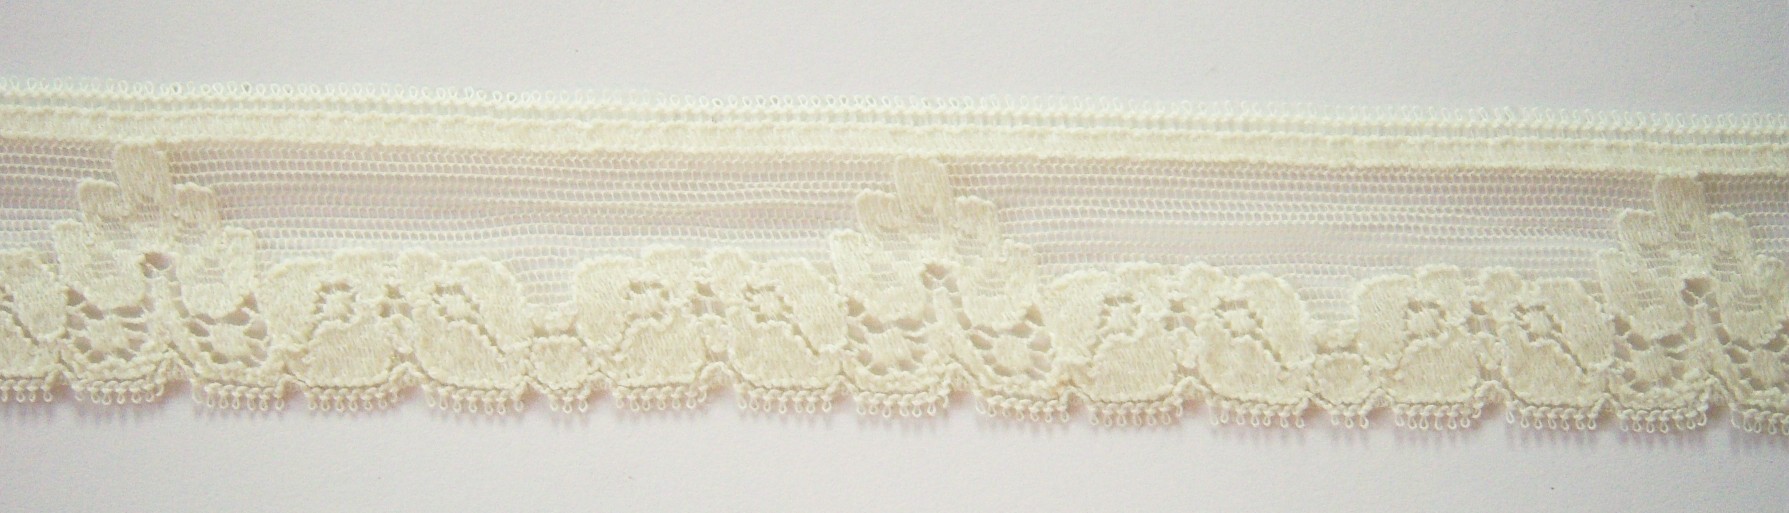 Wren Yellow 1 3/8" Stretch Lace